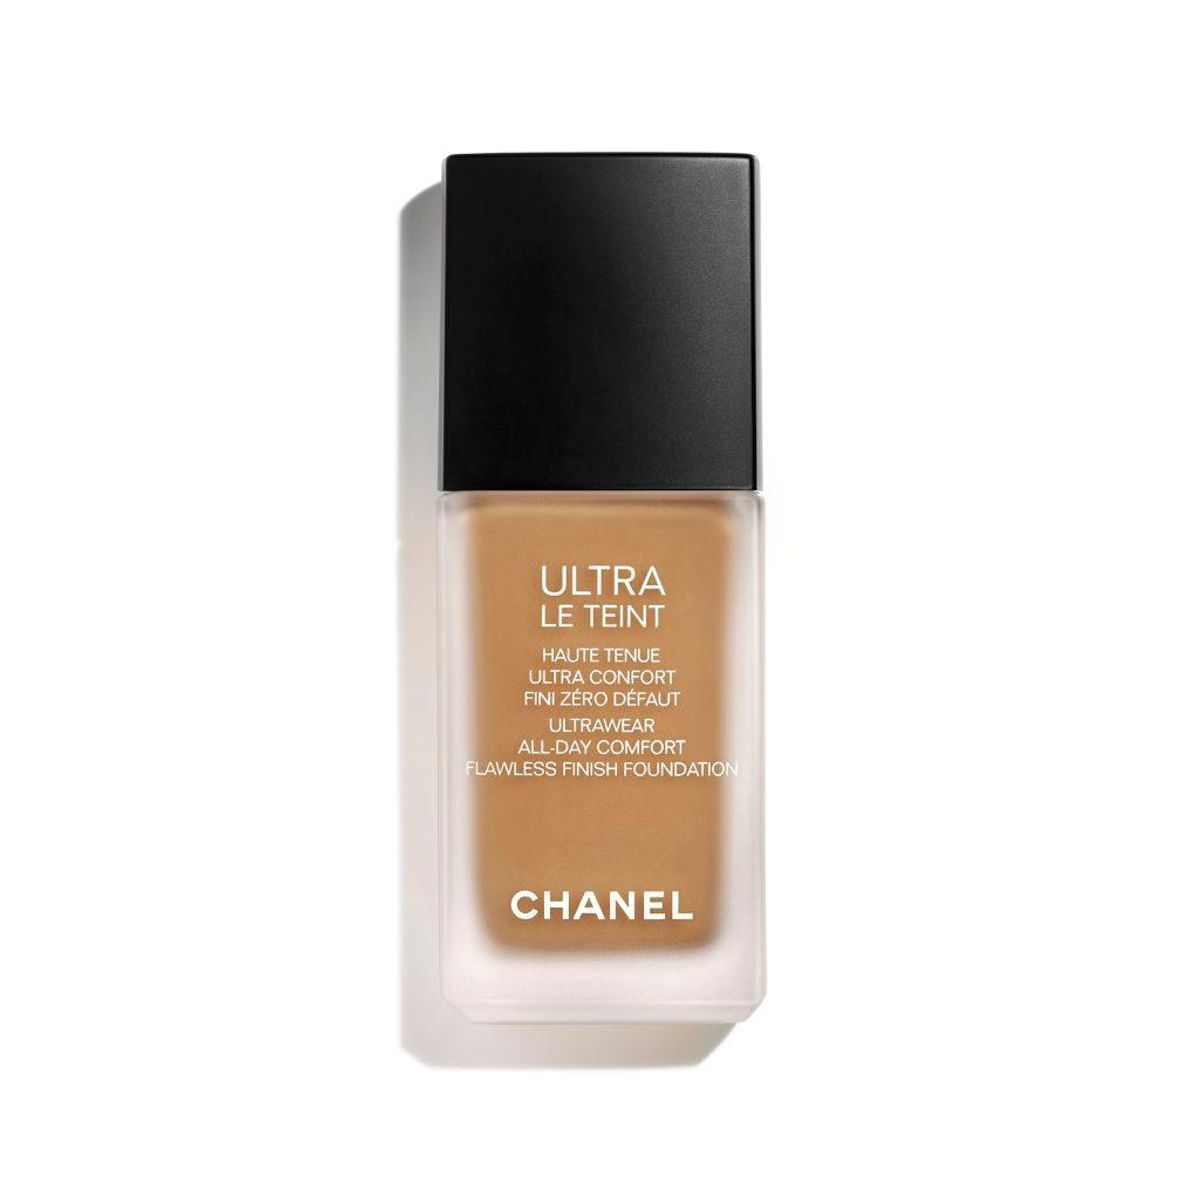 Ultra Le Teint Ultrawear All-day Comfort Flawless Finish Foundation